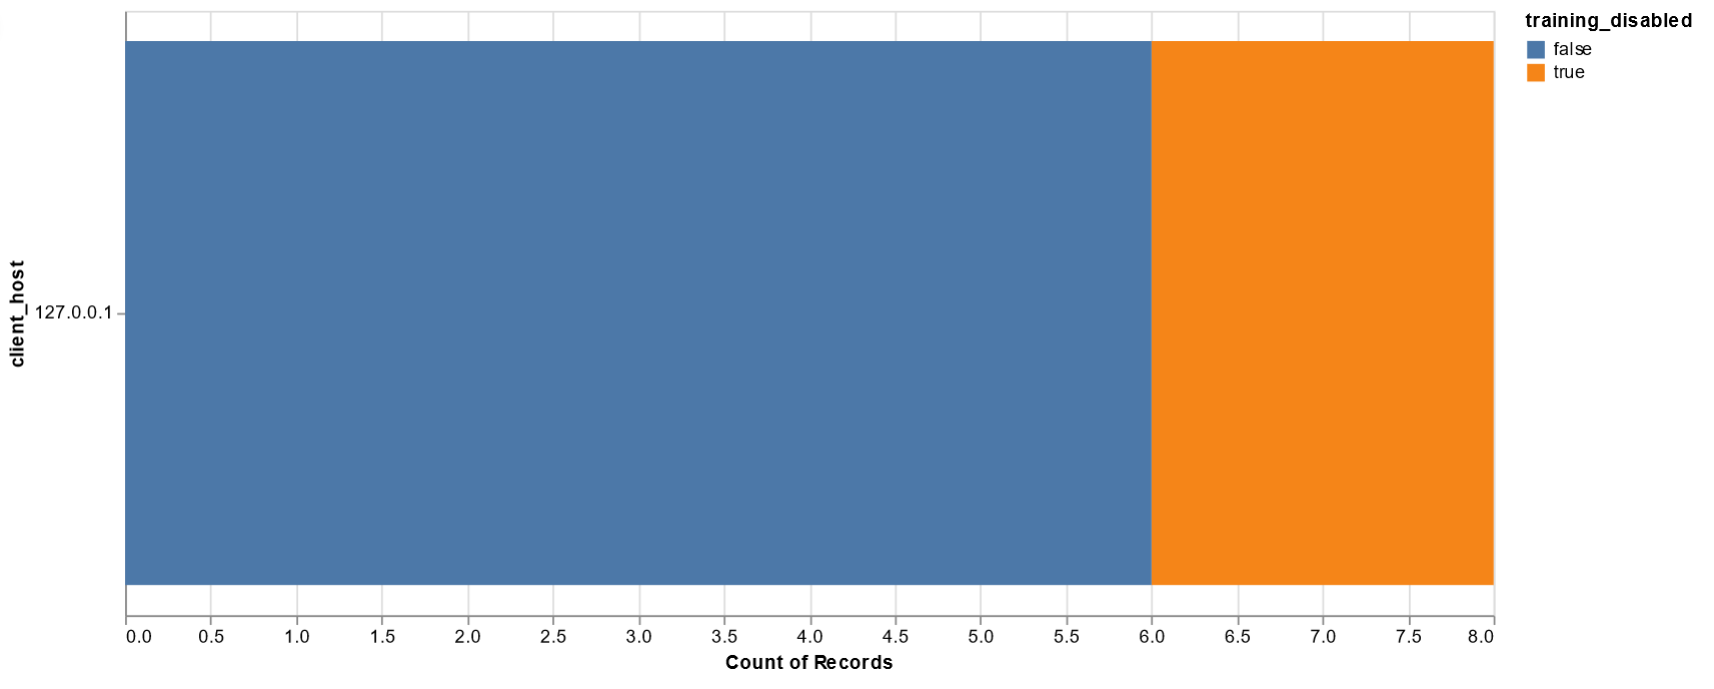 Bar chart of requests with training disabled setting